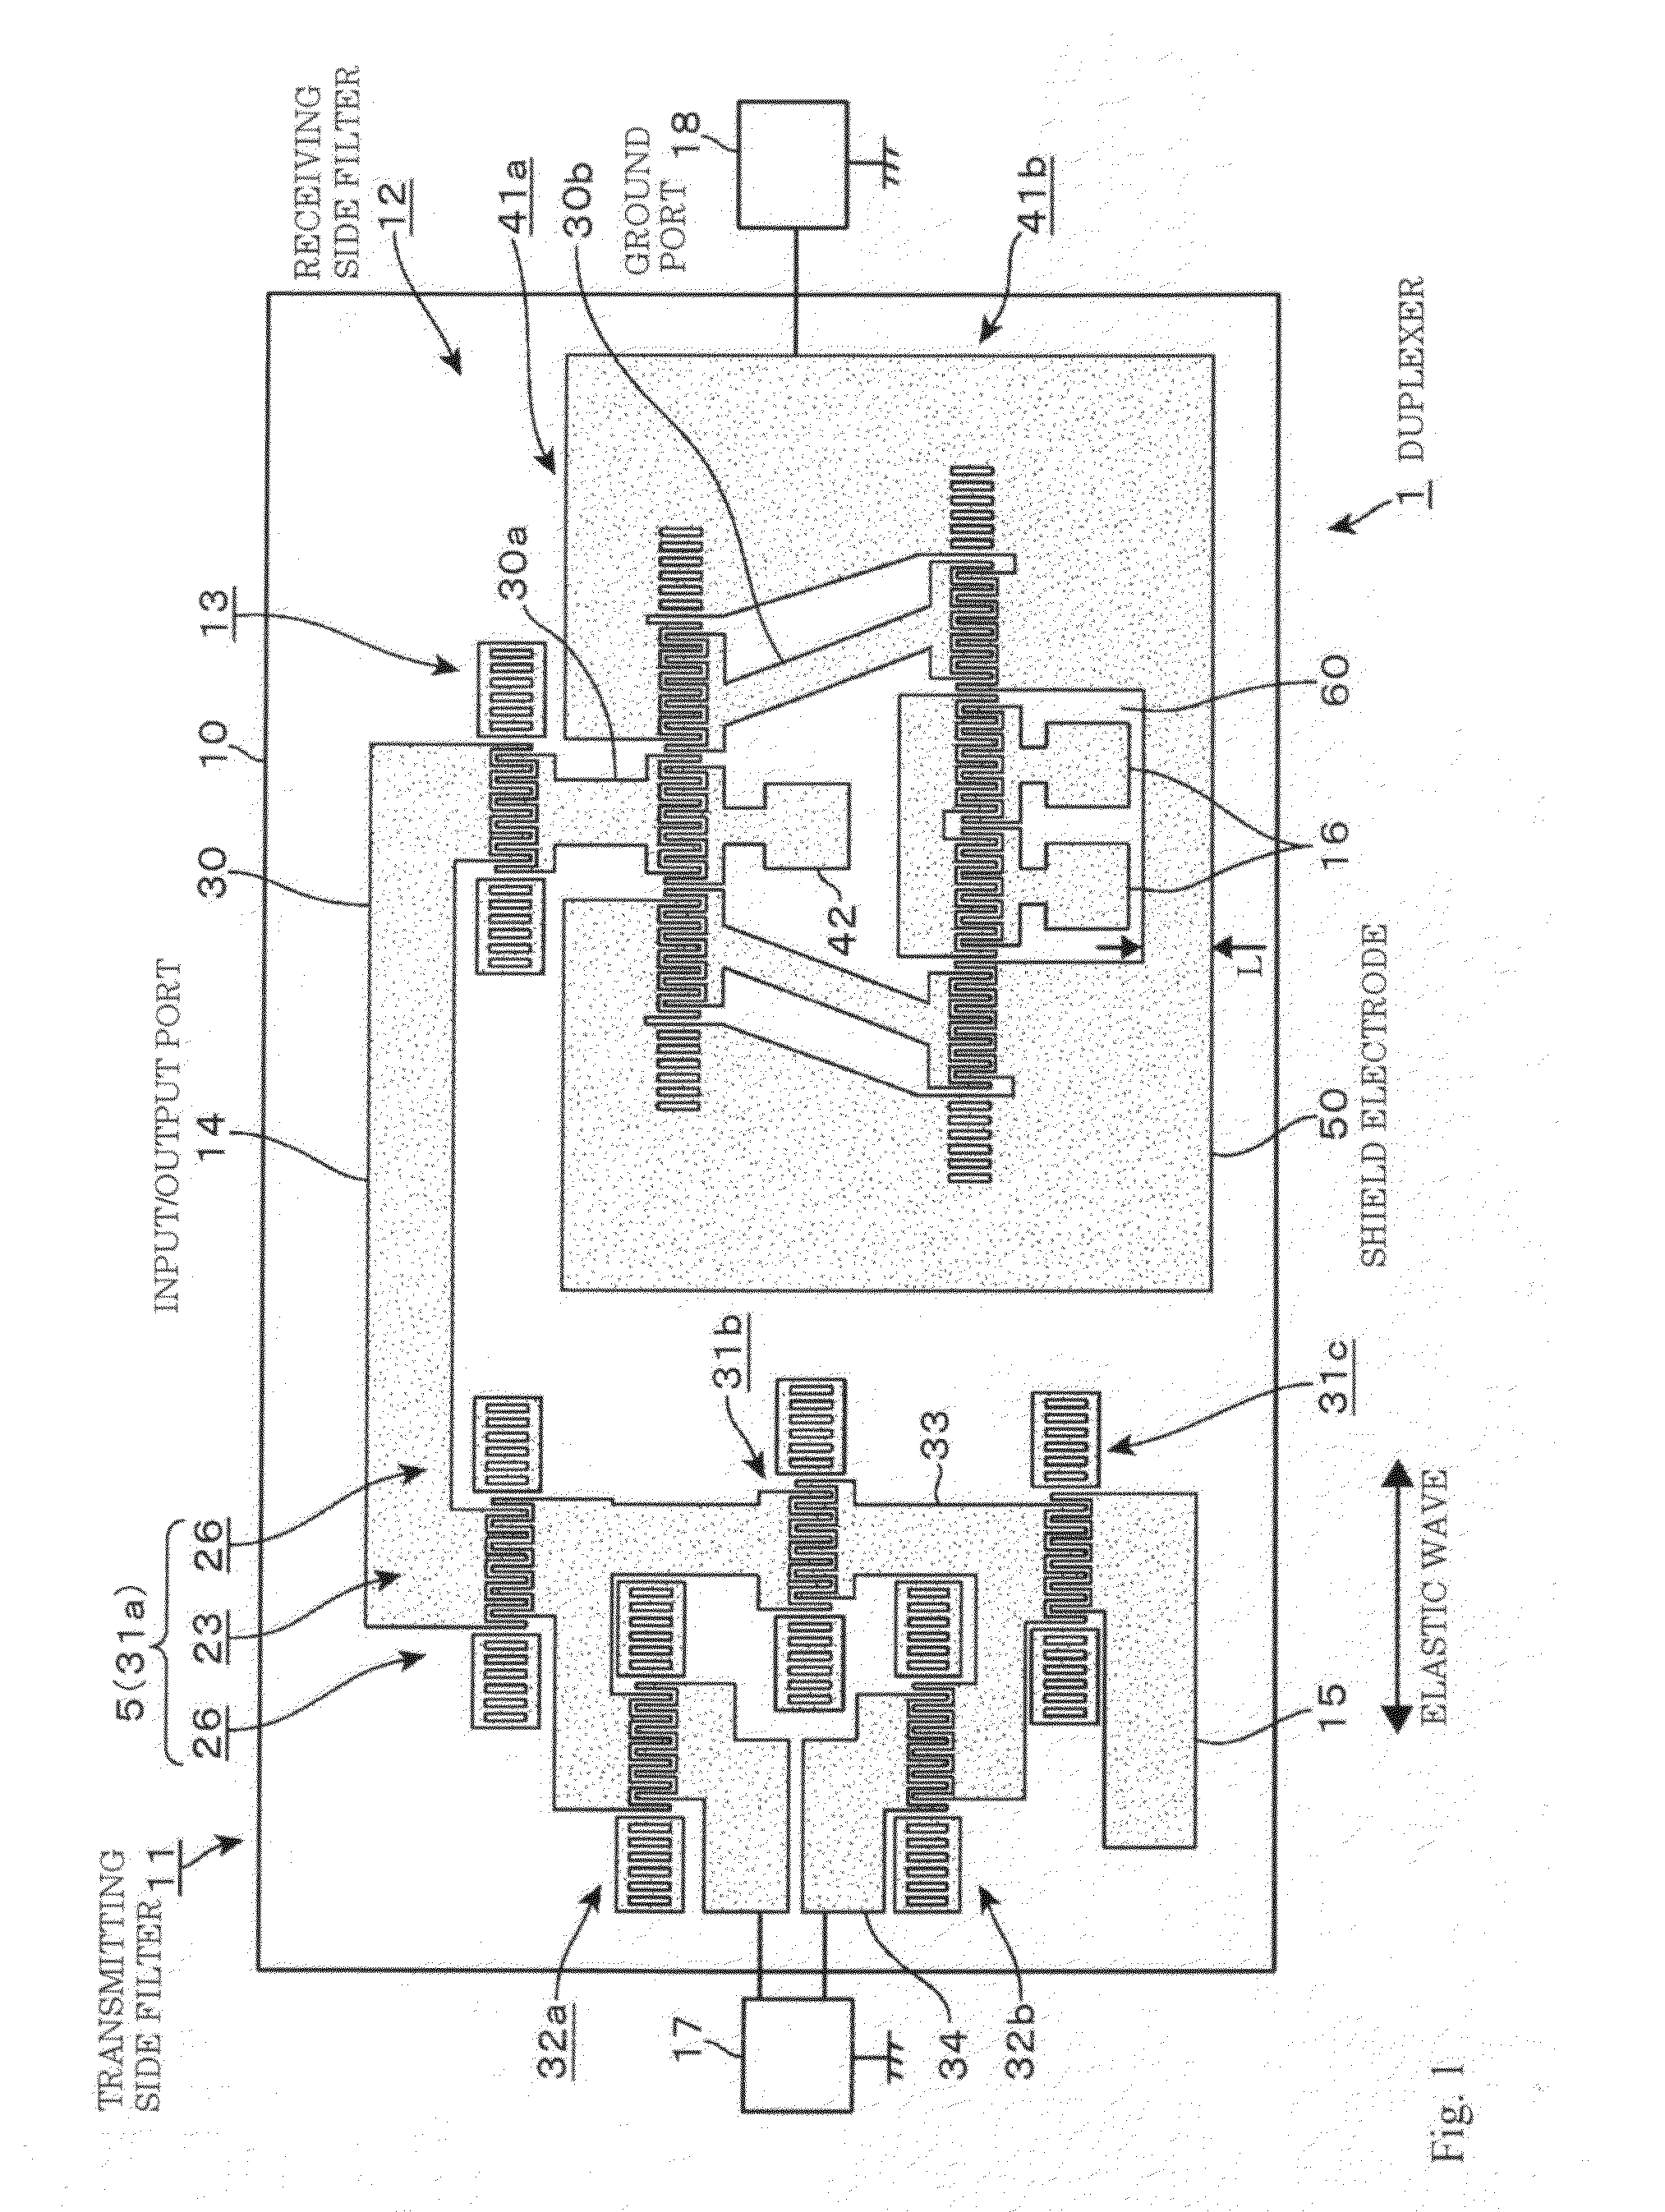 Receiving side filter of duplexer and duplexer